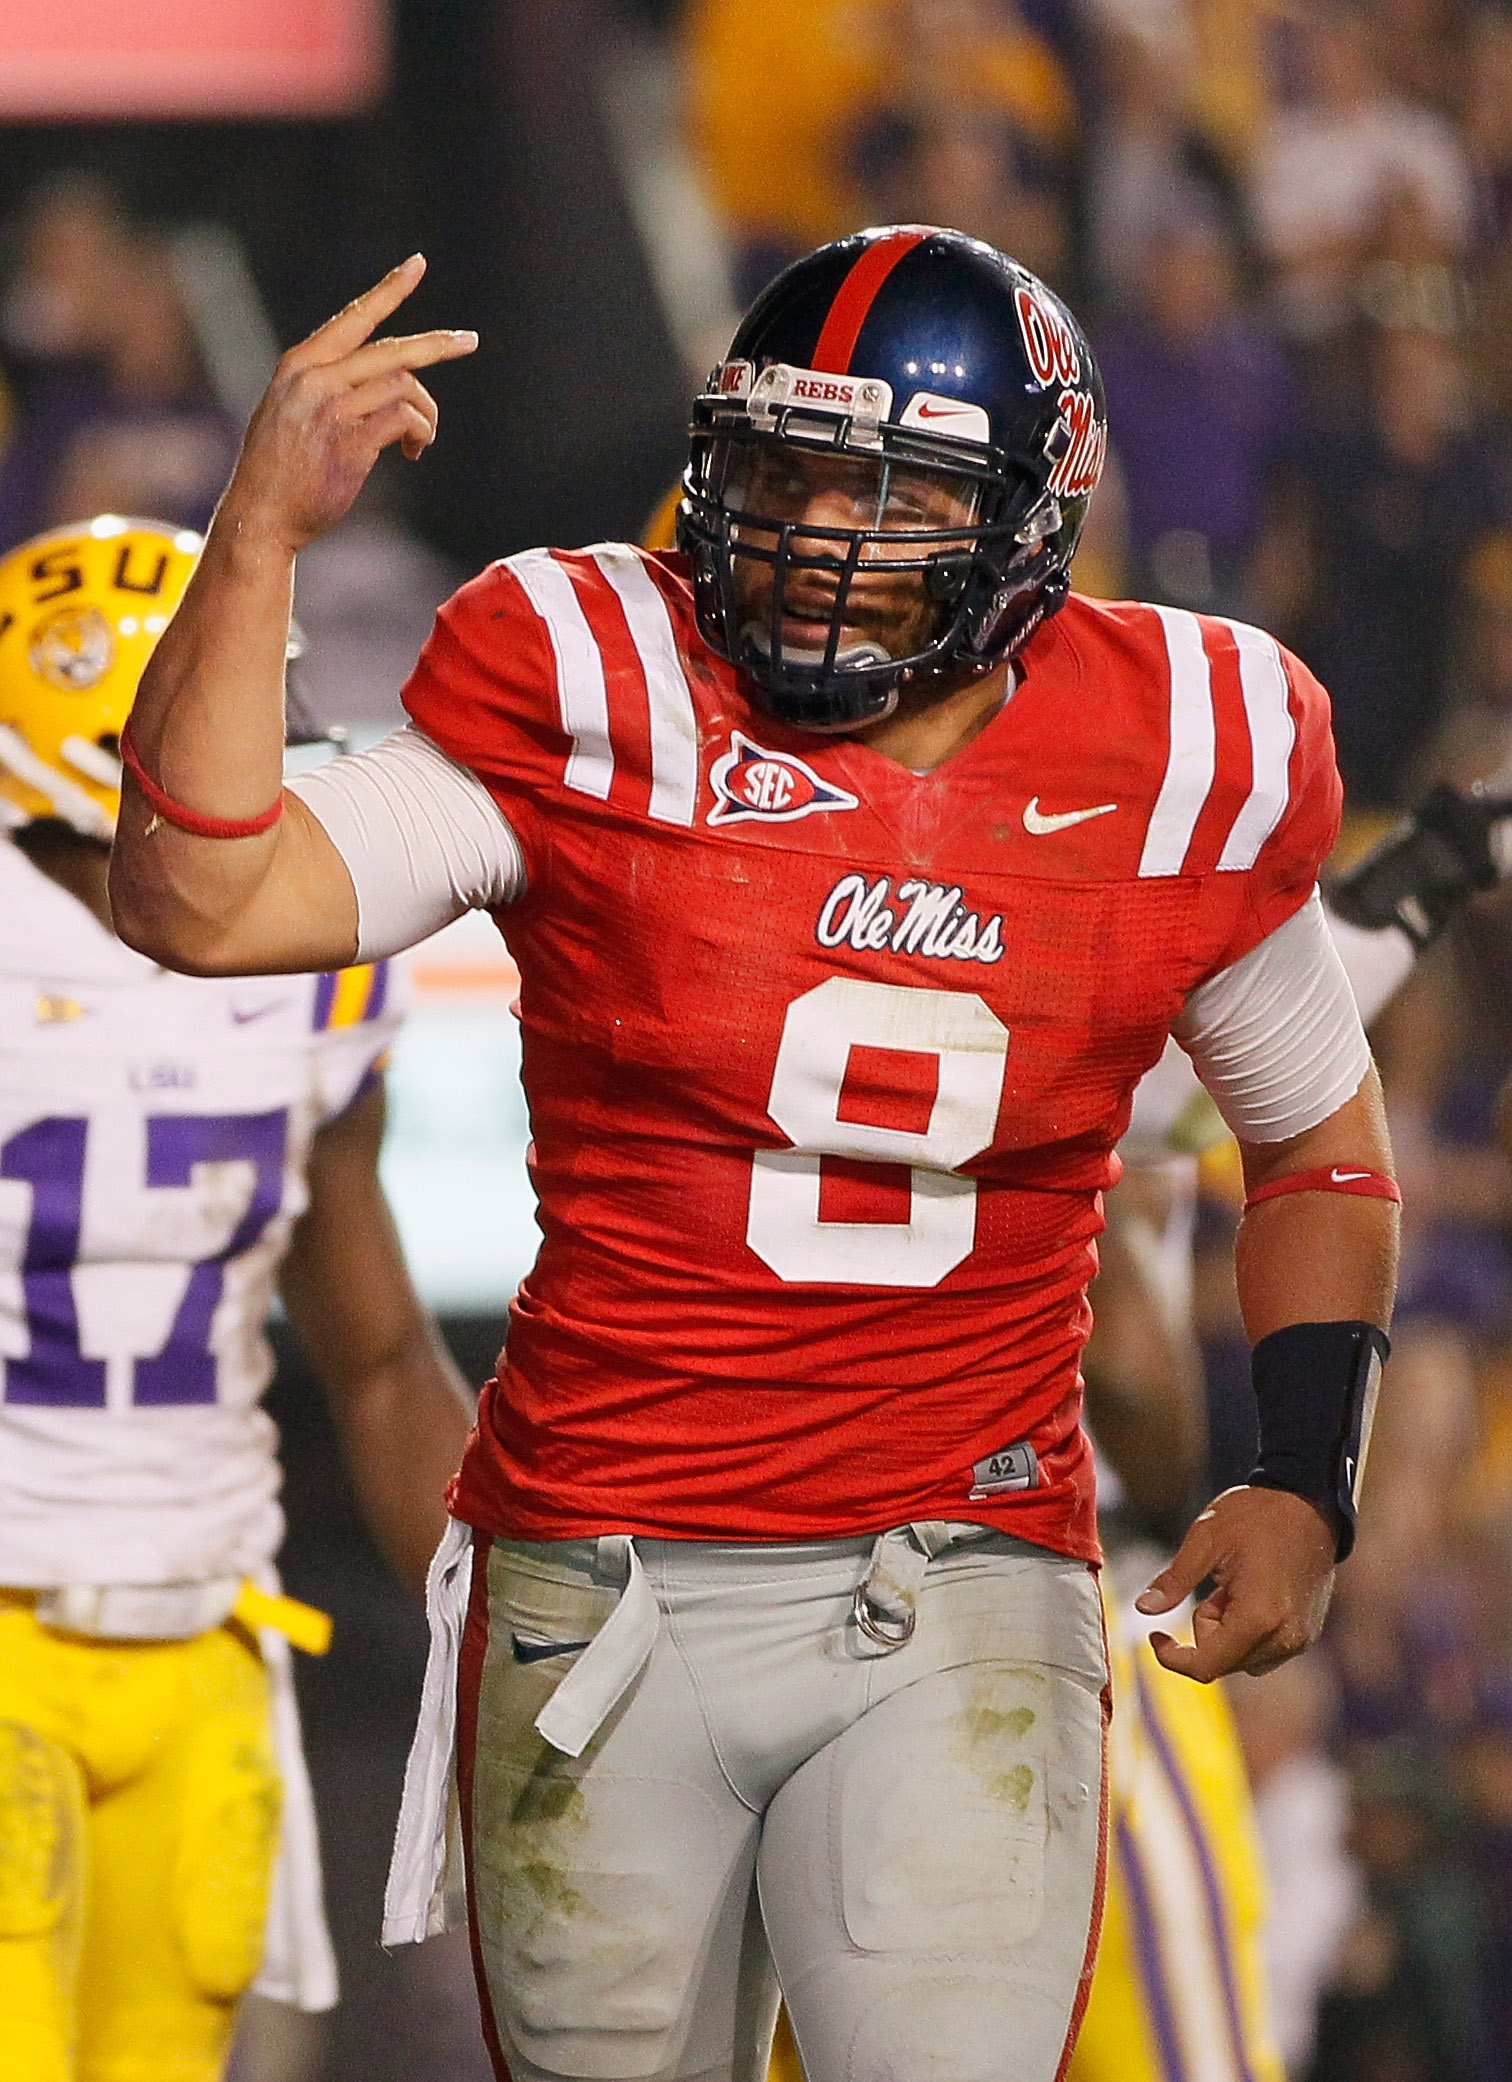 BATON ROUGE, LA - NOVEMBER 20:  Quarterback Jeremiah Masoli #8 of the Ole Miss Rebels reacts after scoring his second touchdown against the Louisiana State University Tigers at Tiger Stadium on November 20, 2010 in Baton Rouge, Louisiana.  (Photo by Kevin